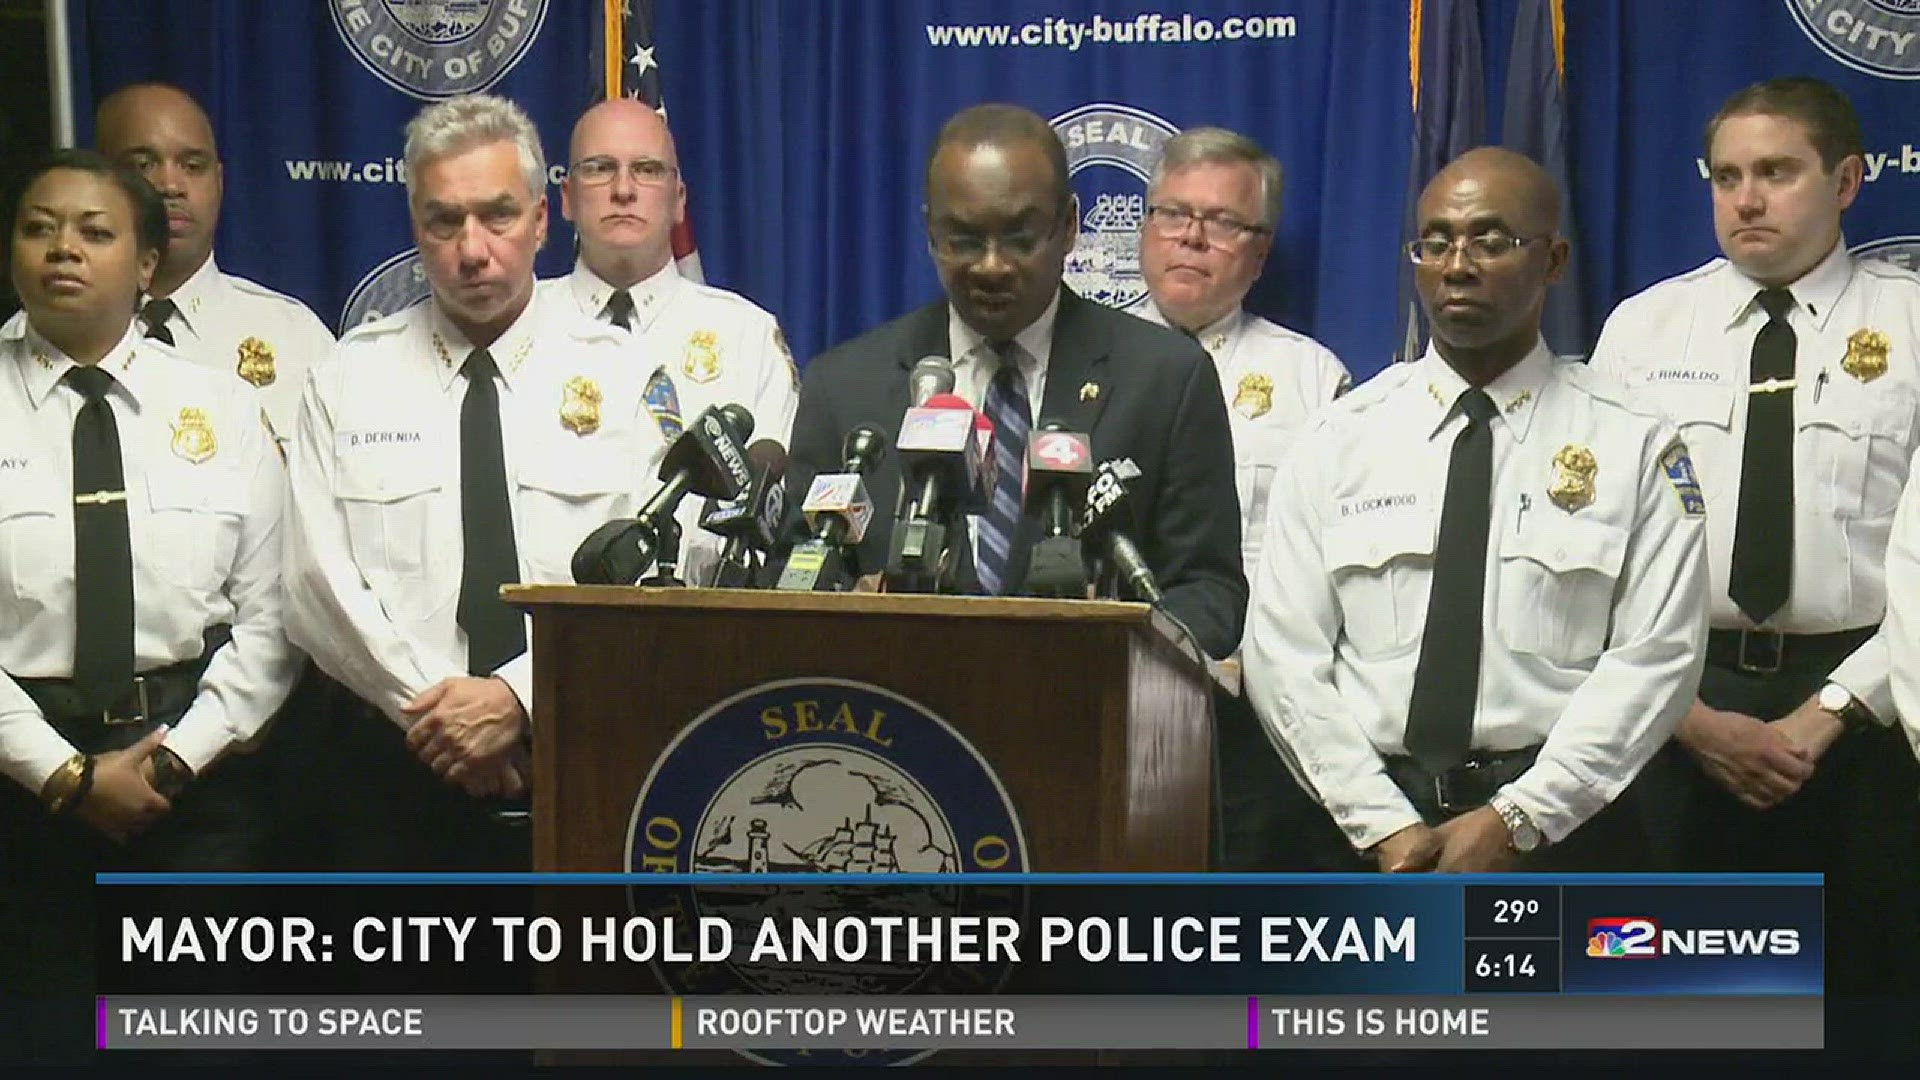 MAYOR: CITY TO HOLD ANOTHER POLICE EXAM